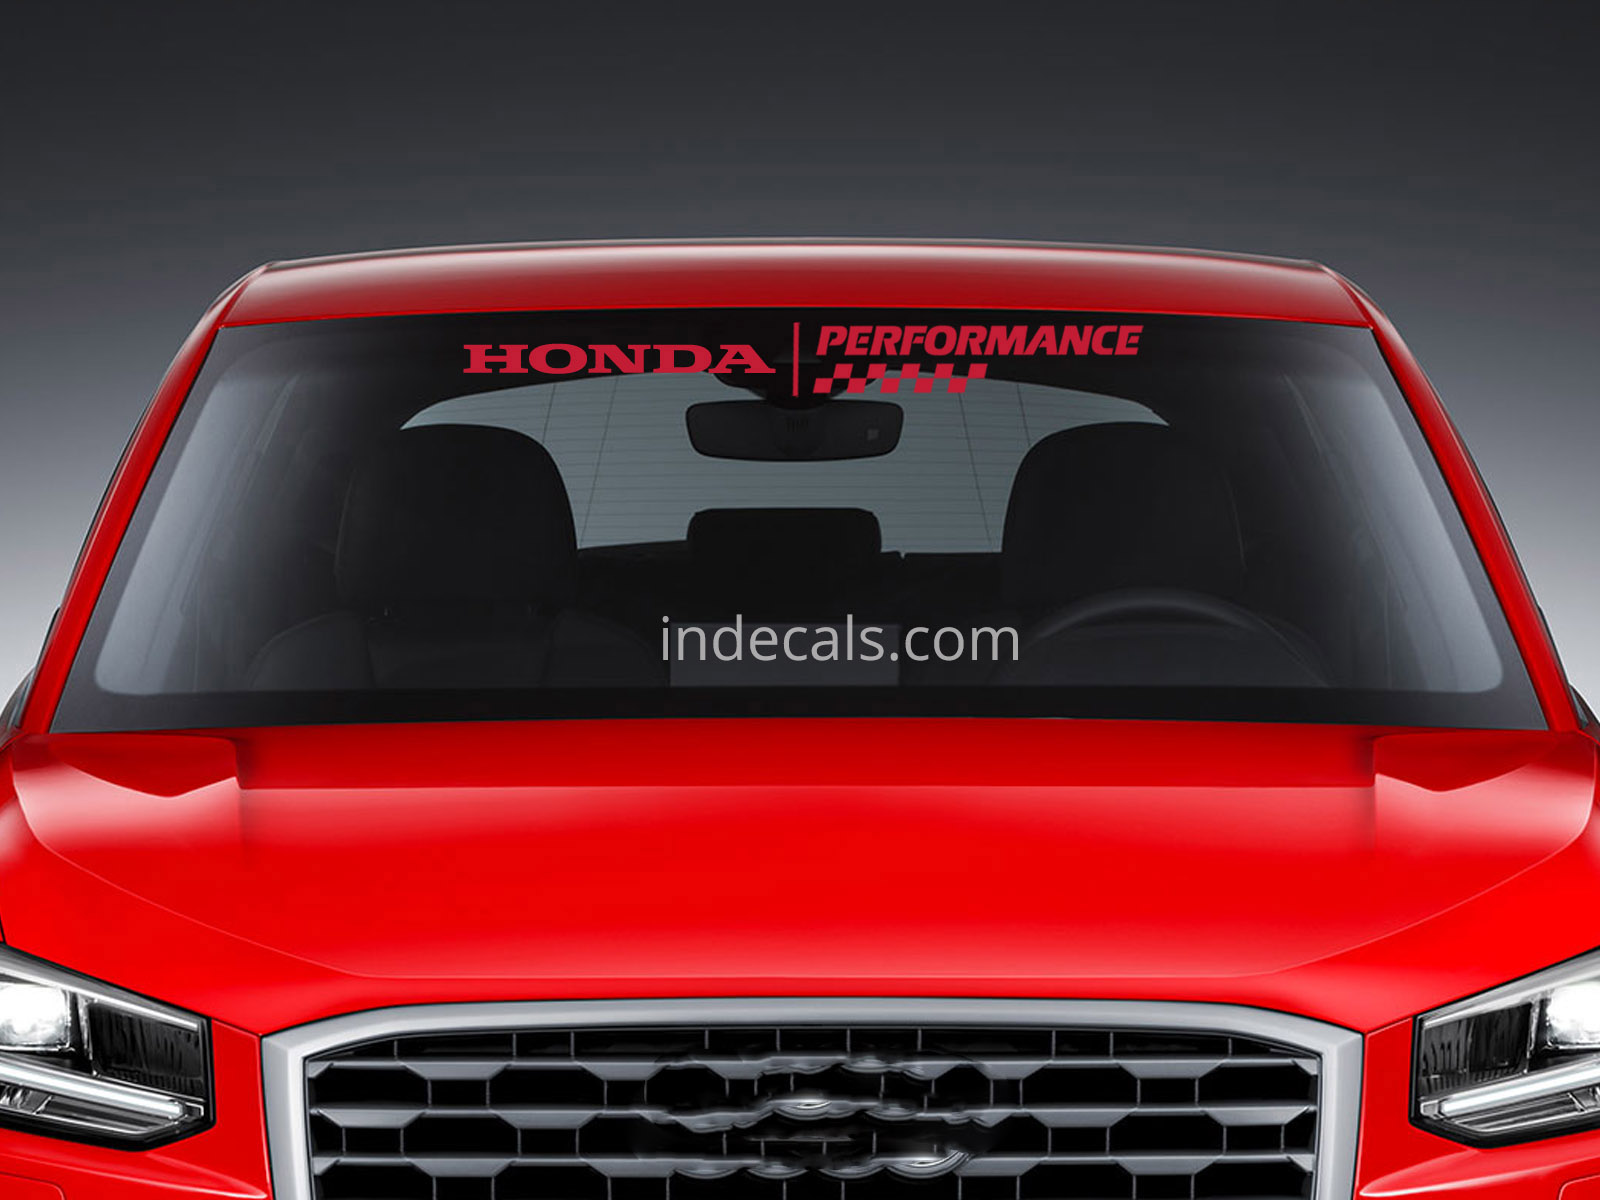 1 x Honda Performance Sticker for Windshield or Back Window - Red